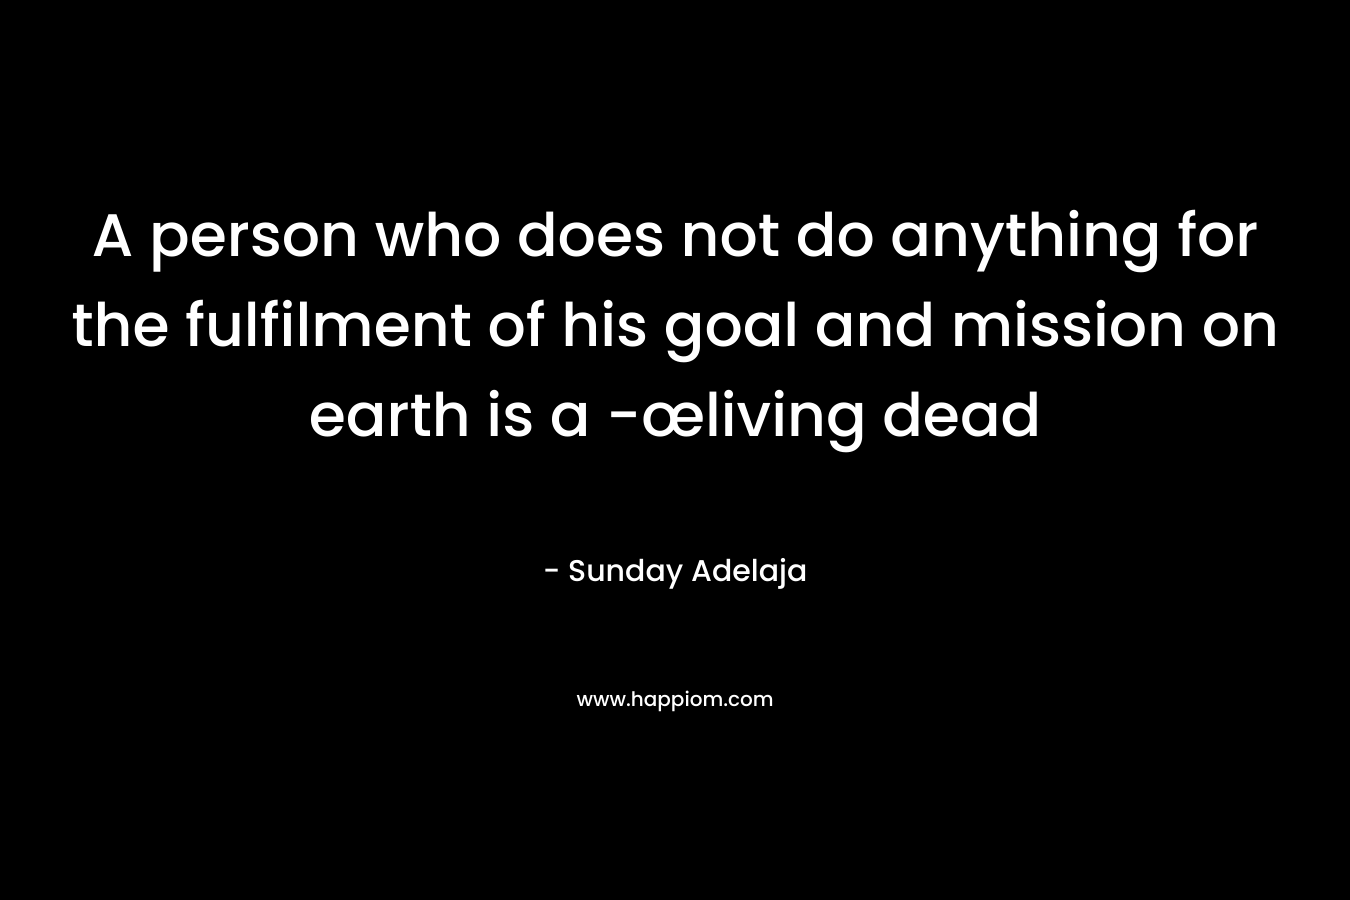 A person who does not do anything for the fulfilment of his goal and mission on earth is a -œliving dead